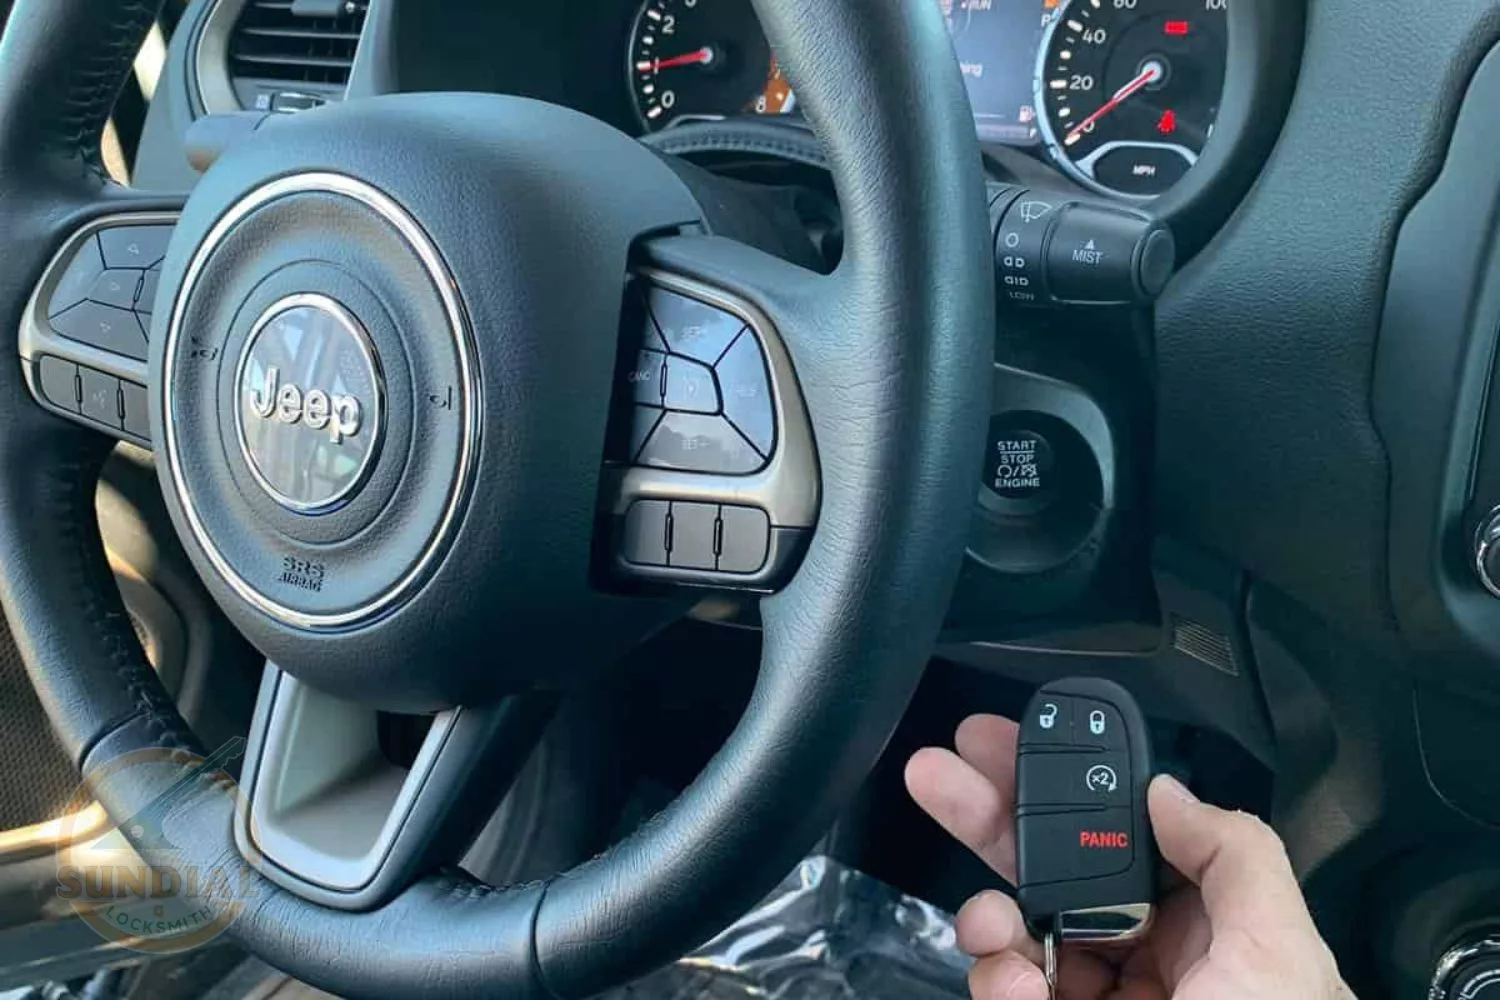 Jeep steering wheel and key fob in hand.